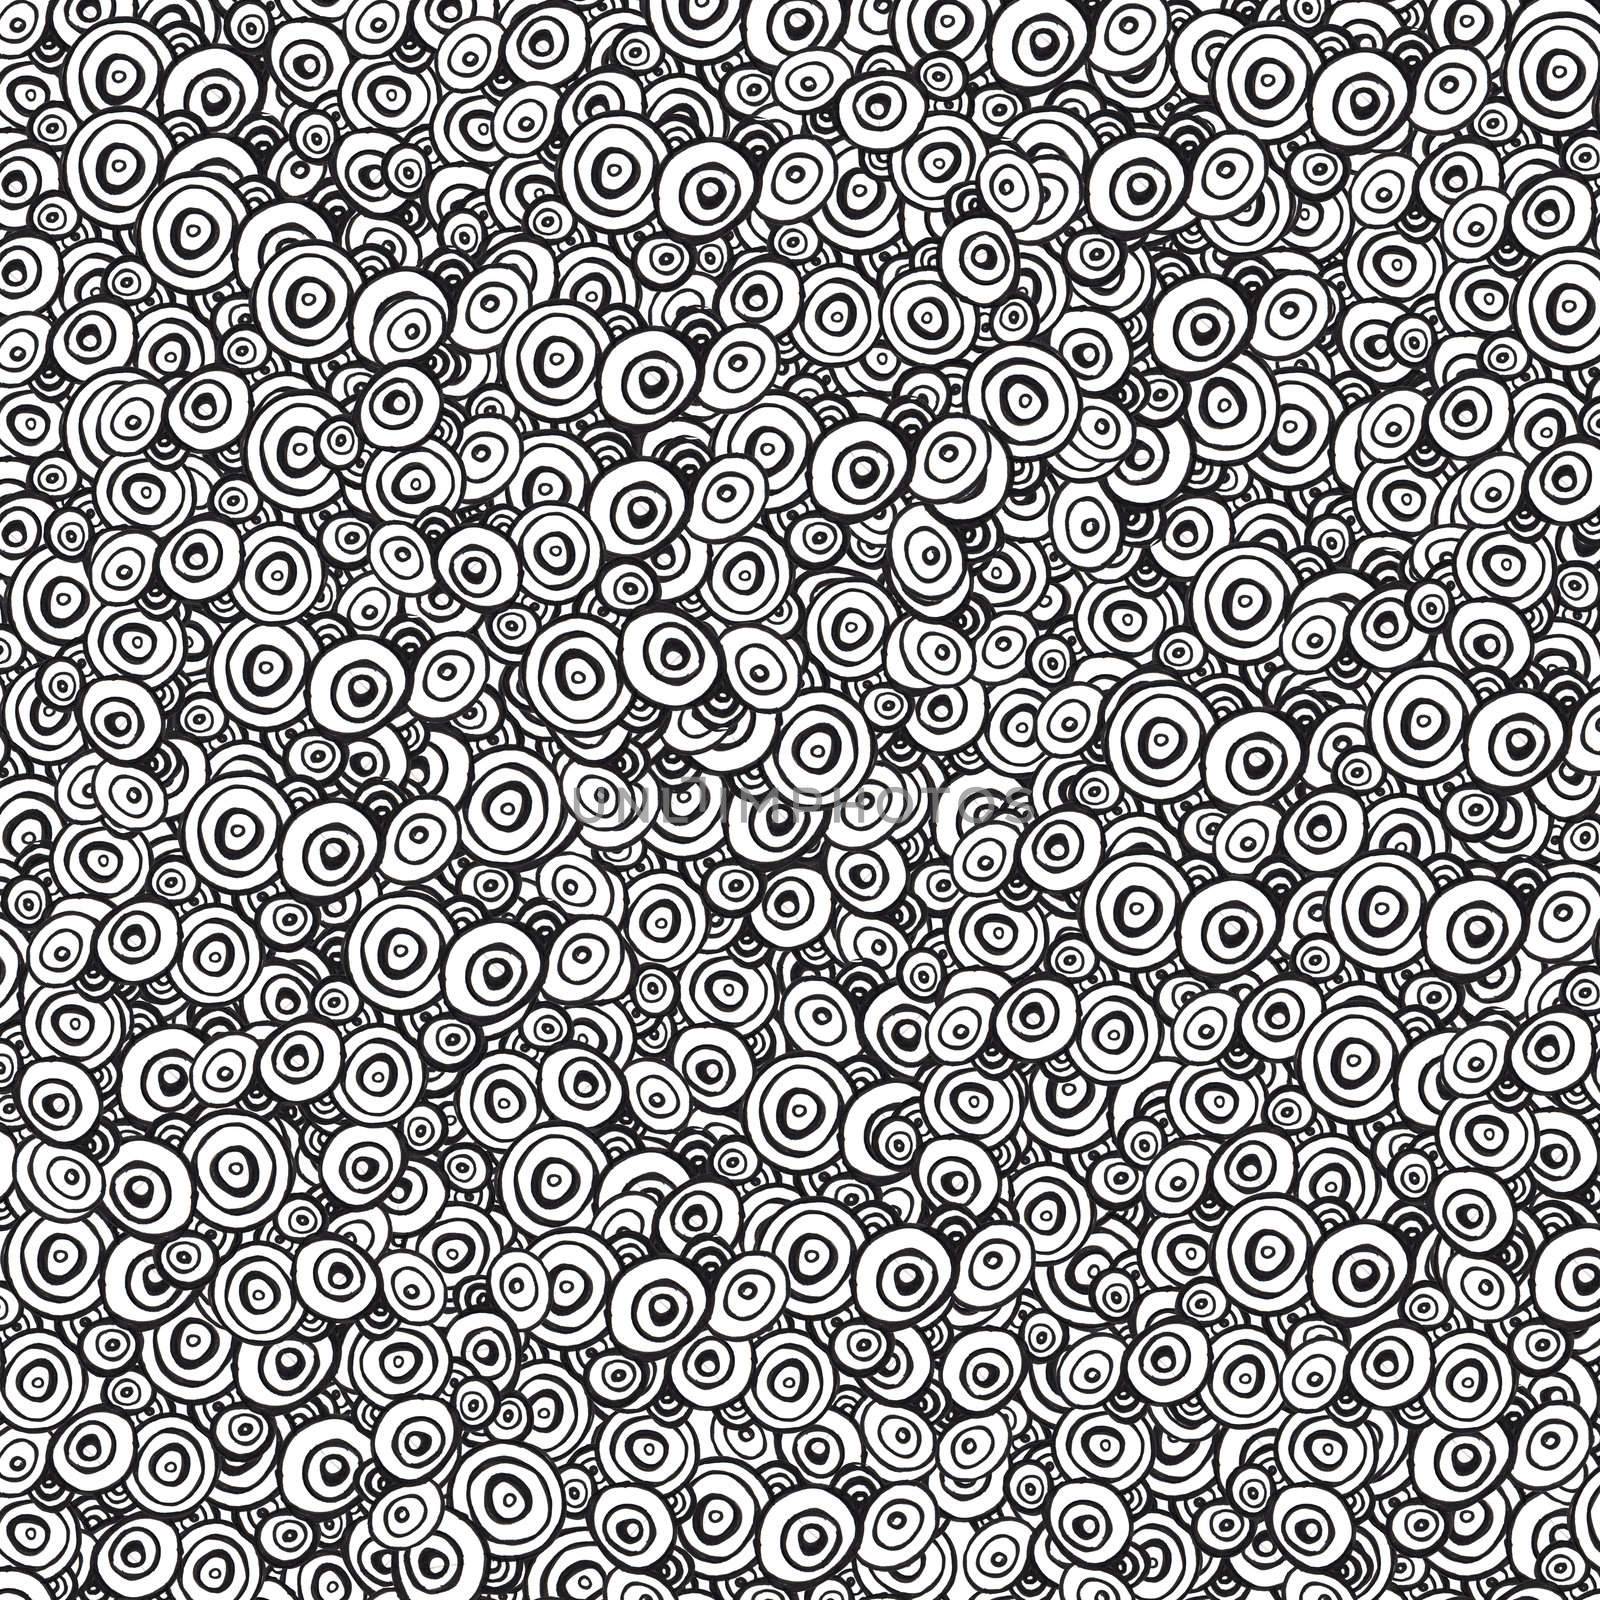 XXXL Hand drawn Circle doodle background by jeremywhat